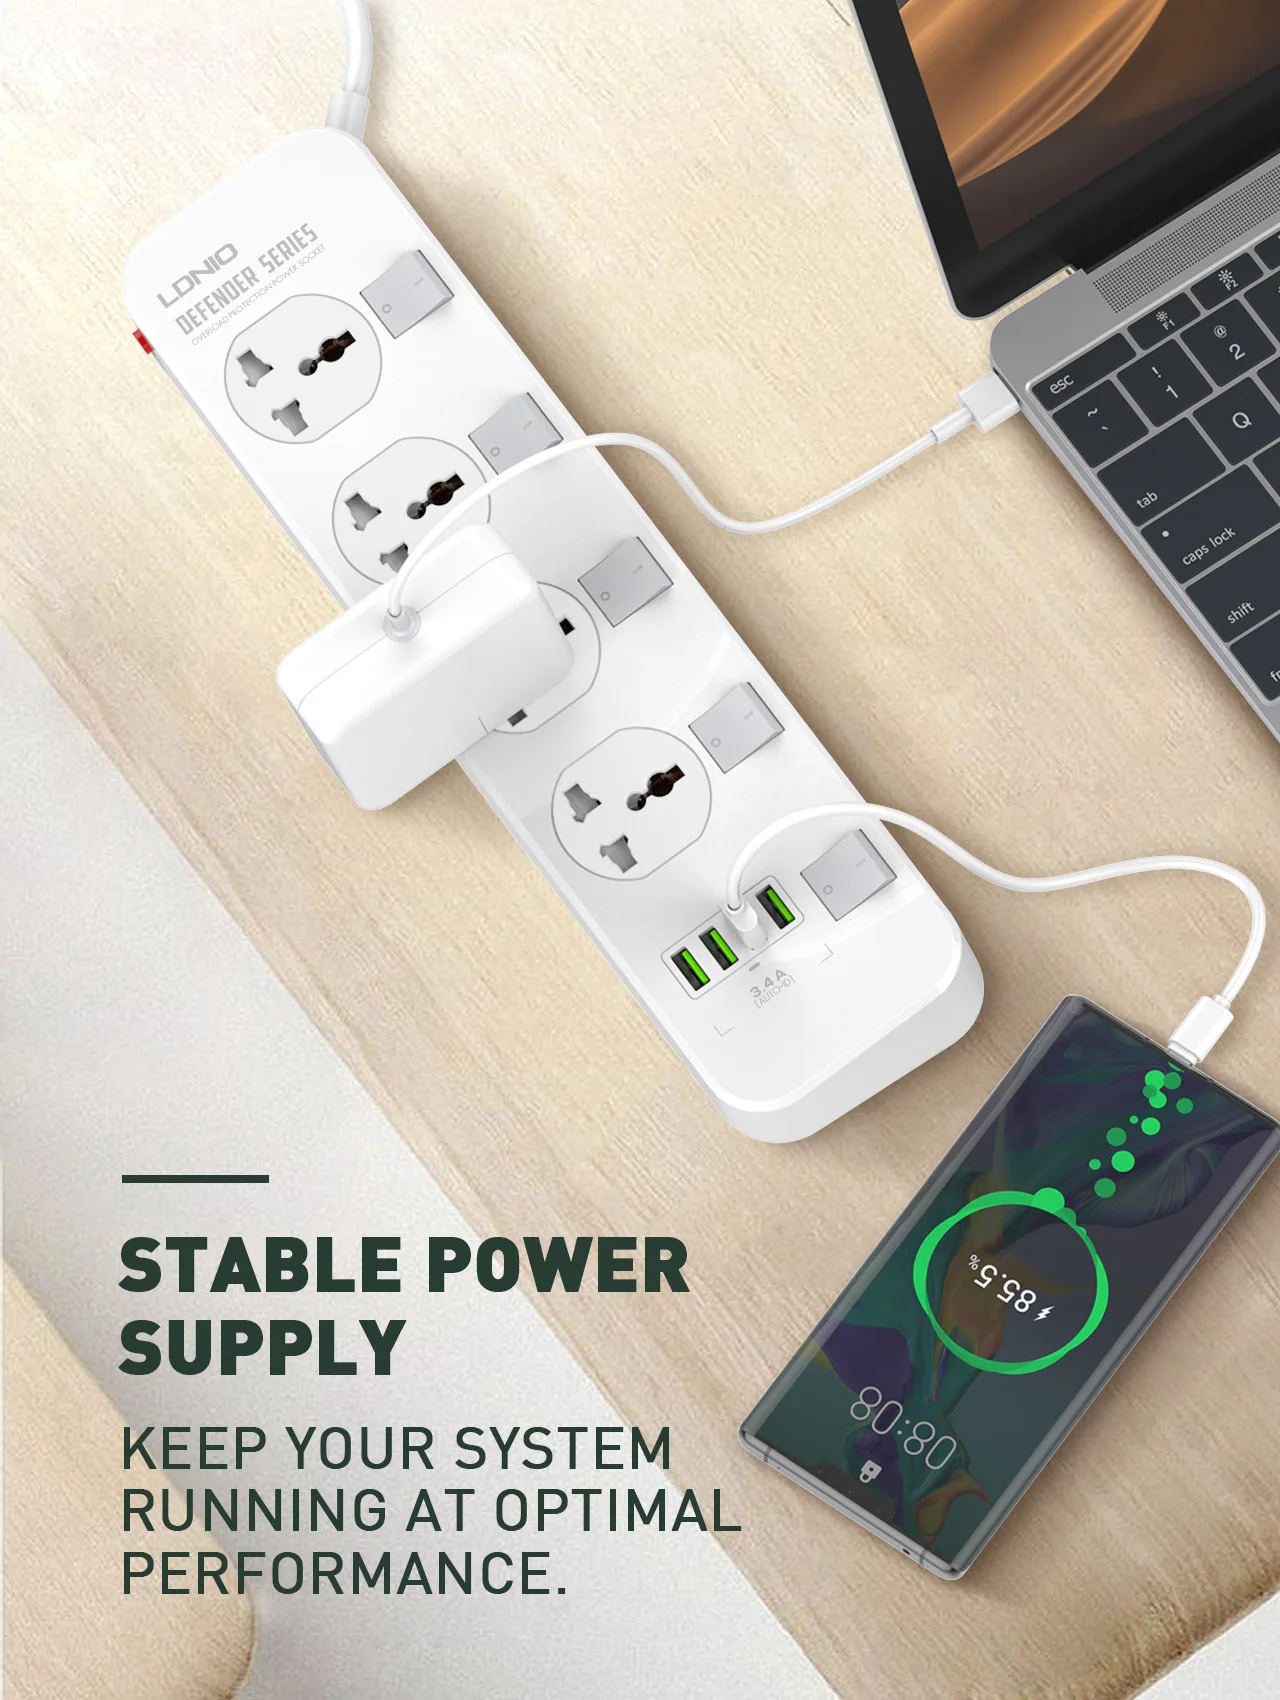 LDNIO SC4408 New 5 Outlet 4 USB port Surge Protector Power Strip With Individual Switch UK/EU/AU/US Plug For option